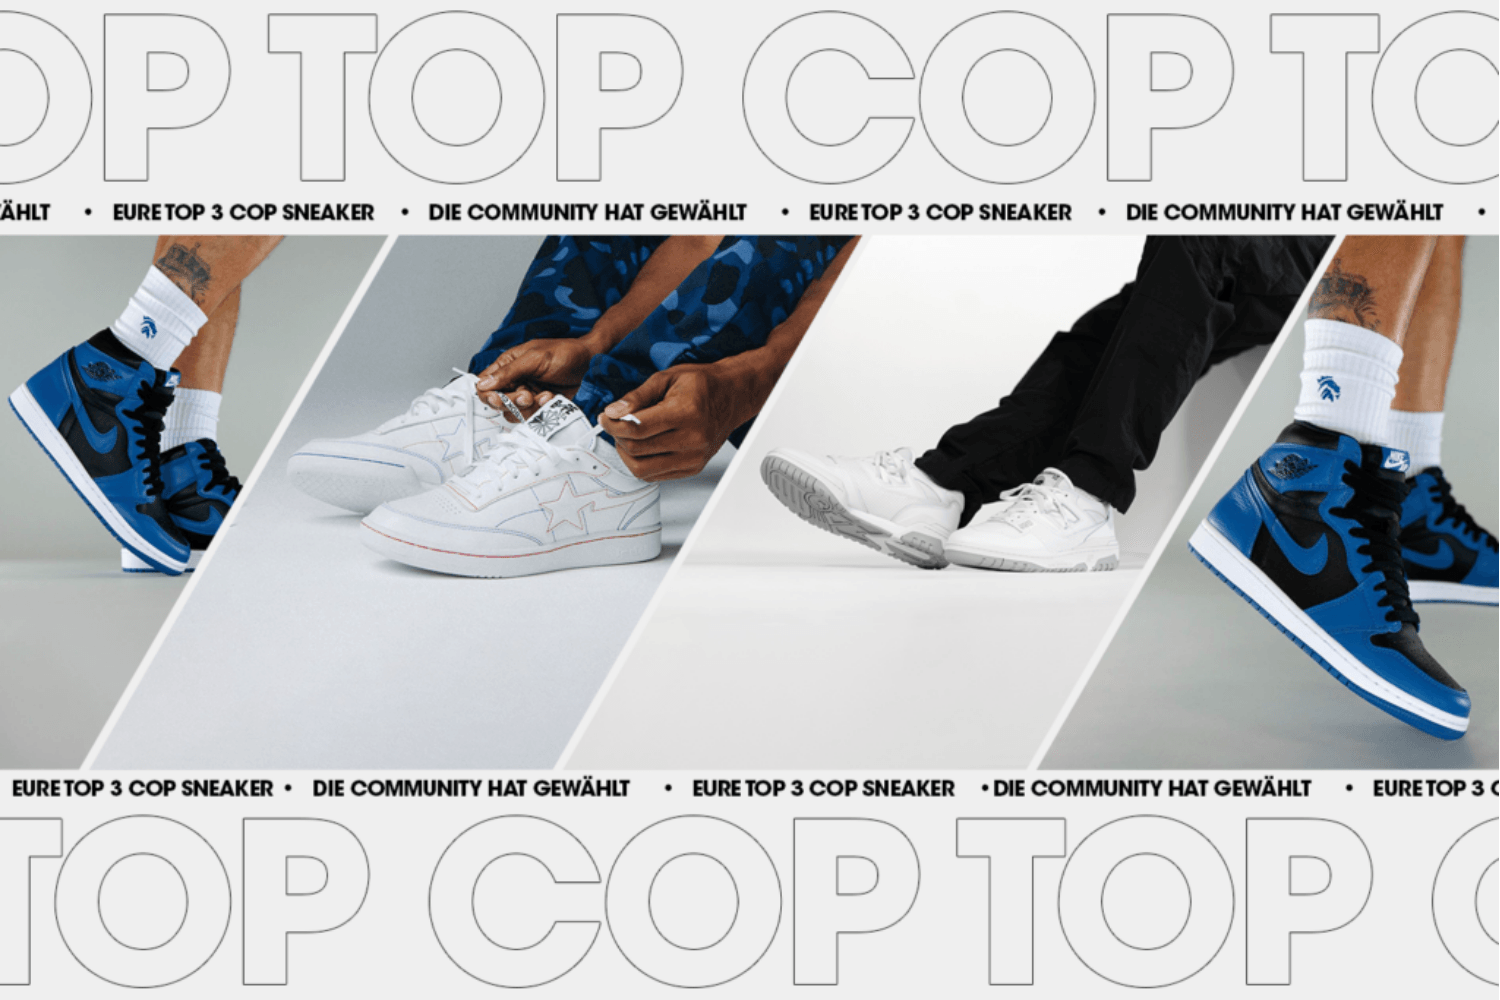 The community has voted: Your Top 3 Cop Sneaker - Week 3